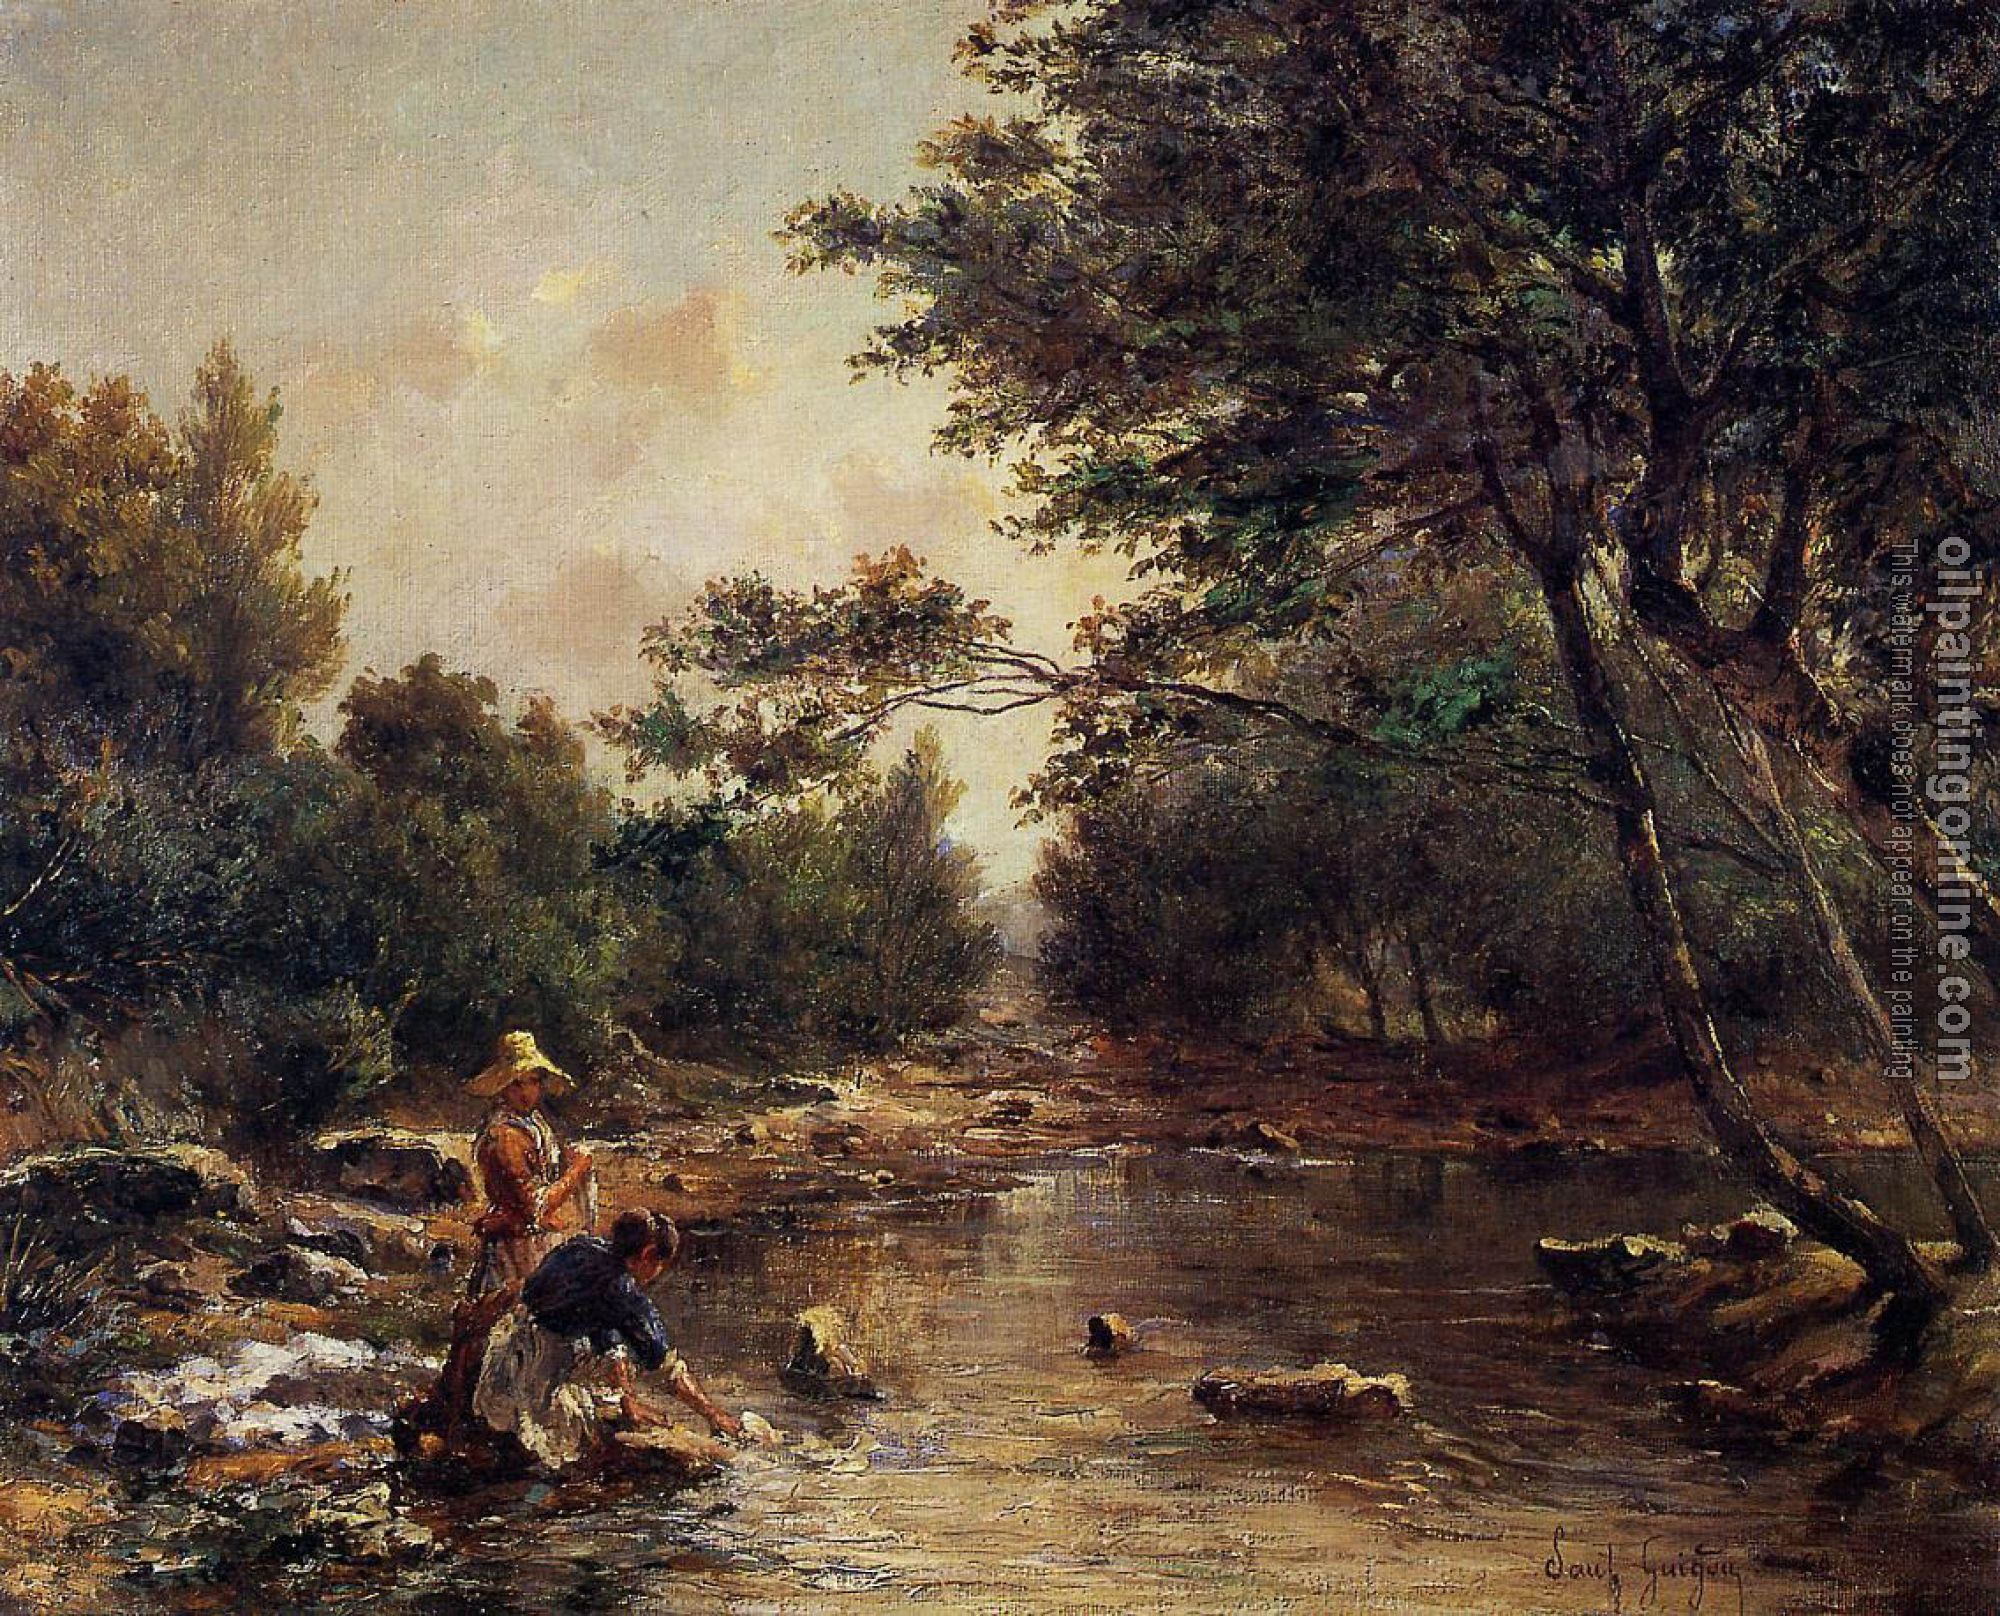 Guigou, Paul-Camille - On the Banks of the River